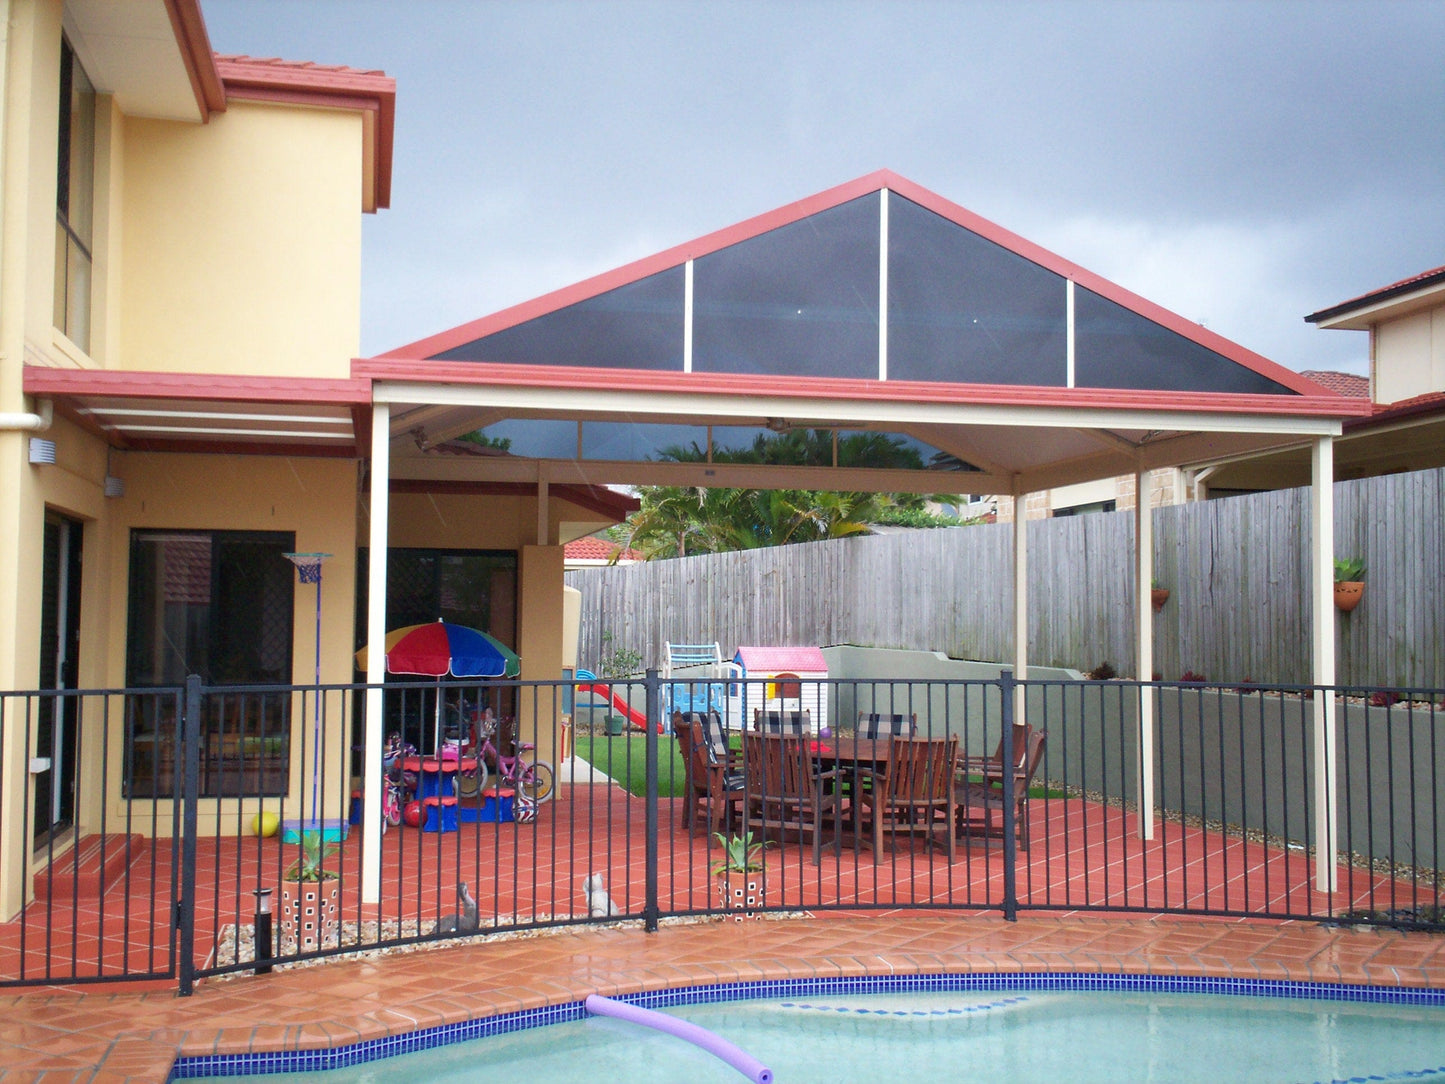 Insulated Gable Patio - 9m x 4m- Supply & Install QHI National